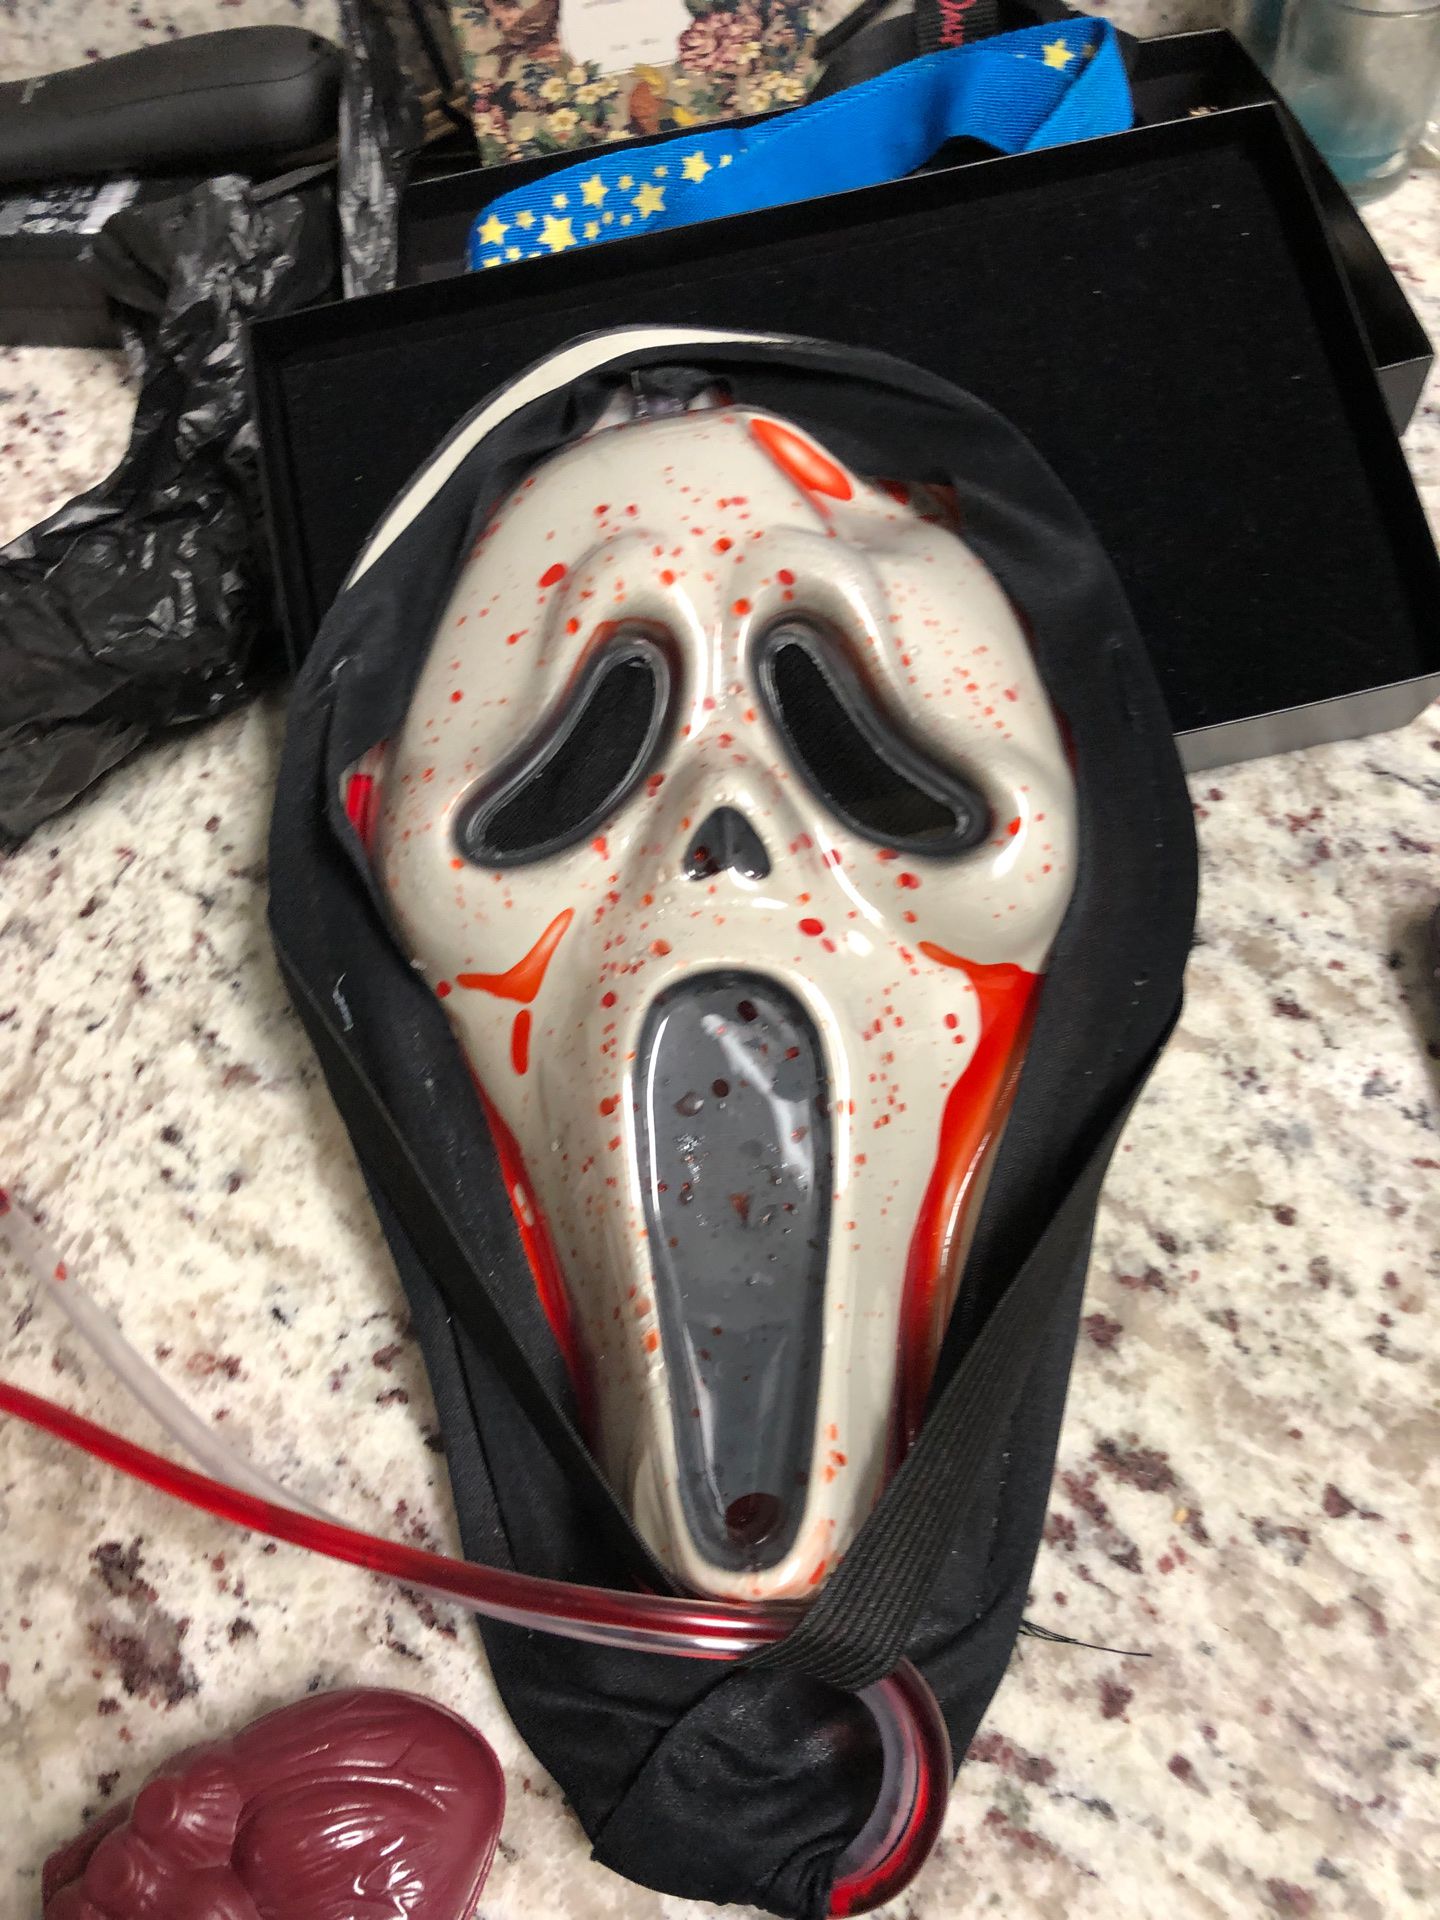 Holloween mask : or anytime you need a mask